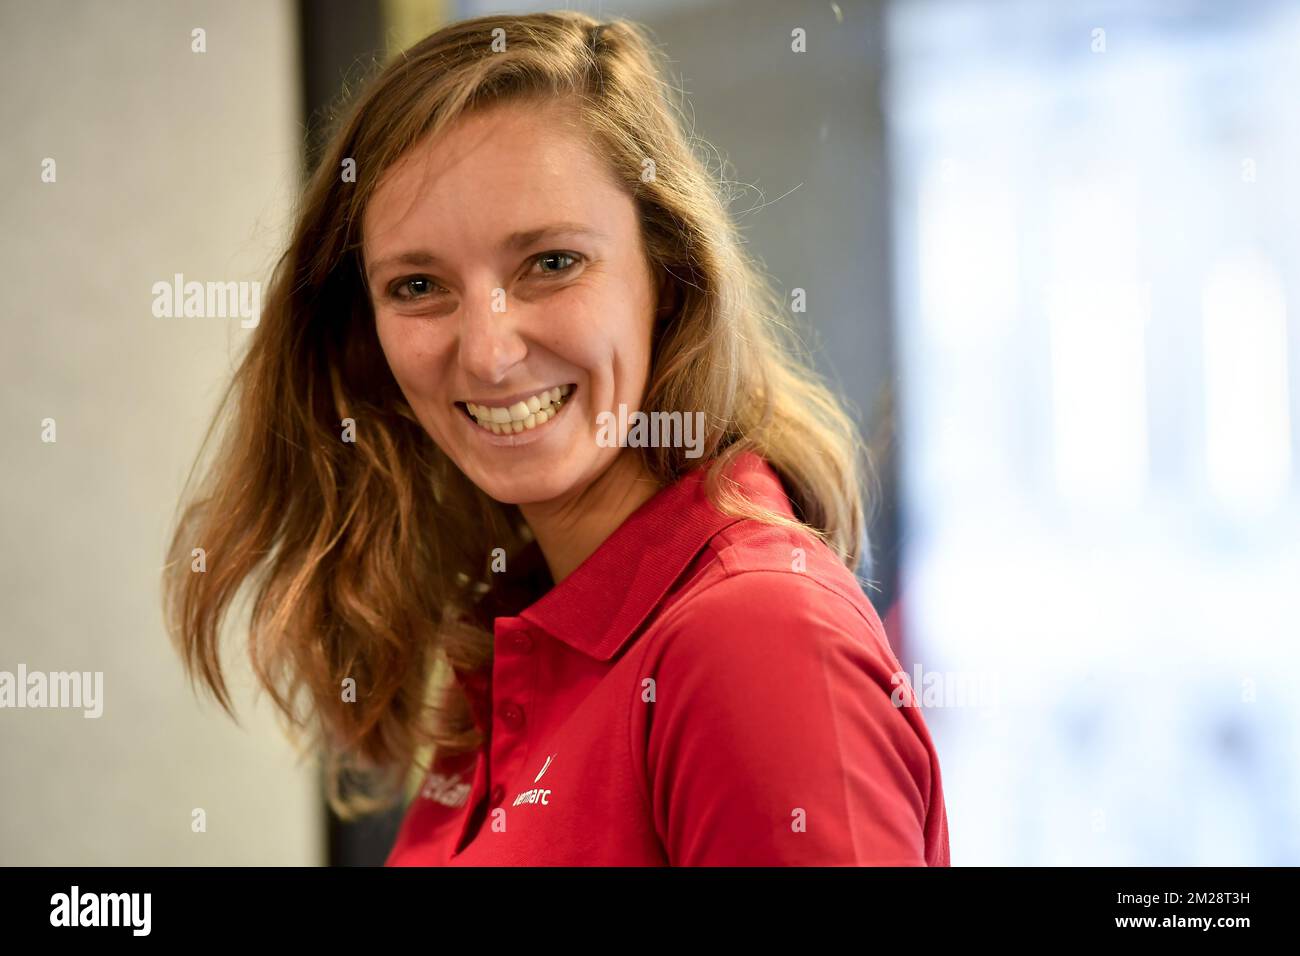 Belgian Fanny Smets poses for the photographer before the start of the IAAF World Championships 2017 in London, United Kingdom, Wednesday 02 August 2017. BELGA PHOTO DIRK WAEM  Stock Photo